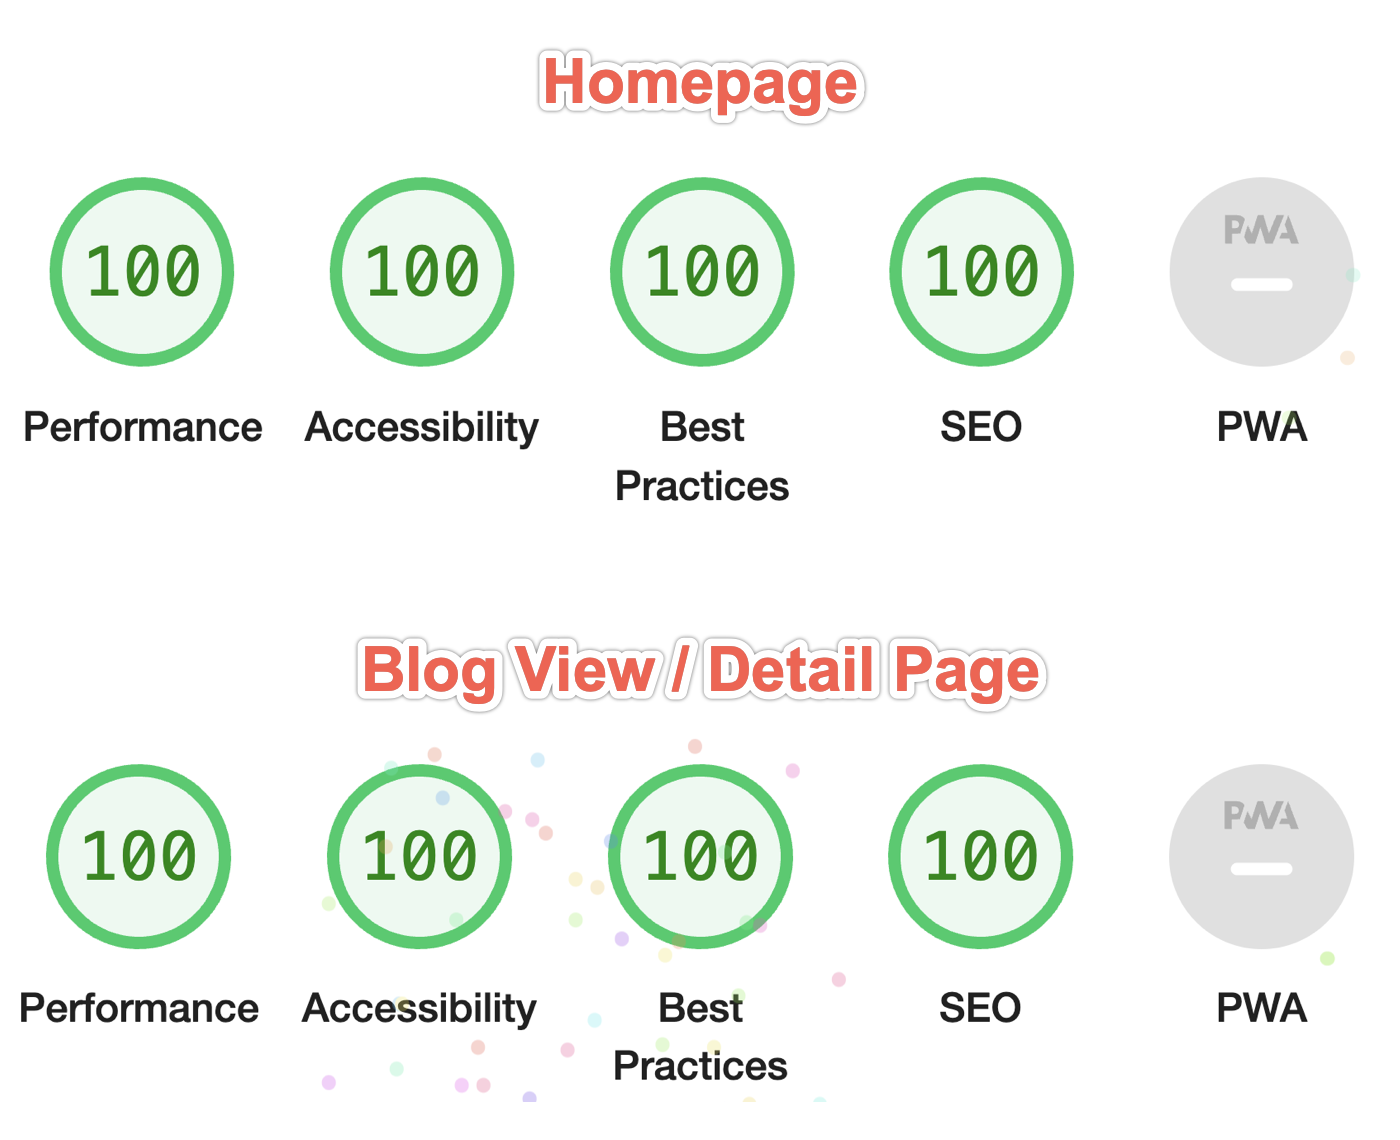 Lighthouse score showing 100 on all facets (except PWA) for both the homepage and the blog detail page.